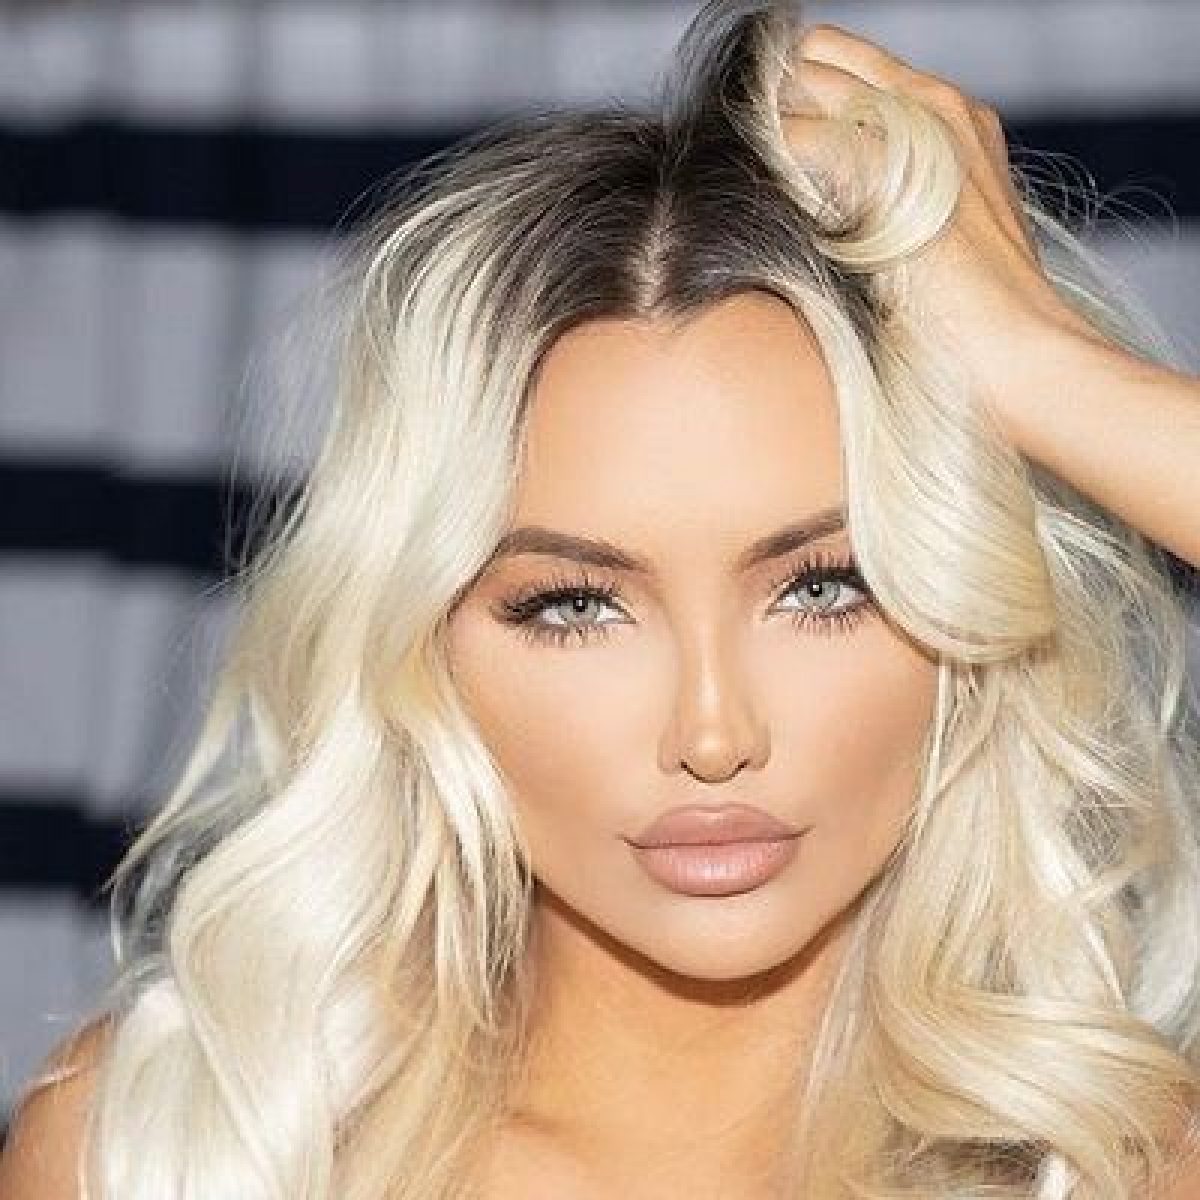 Lindsey Pelas plastic surgery before and after